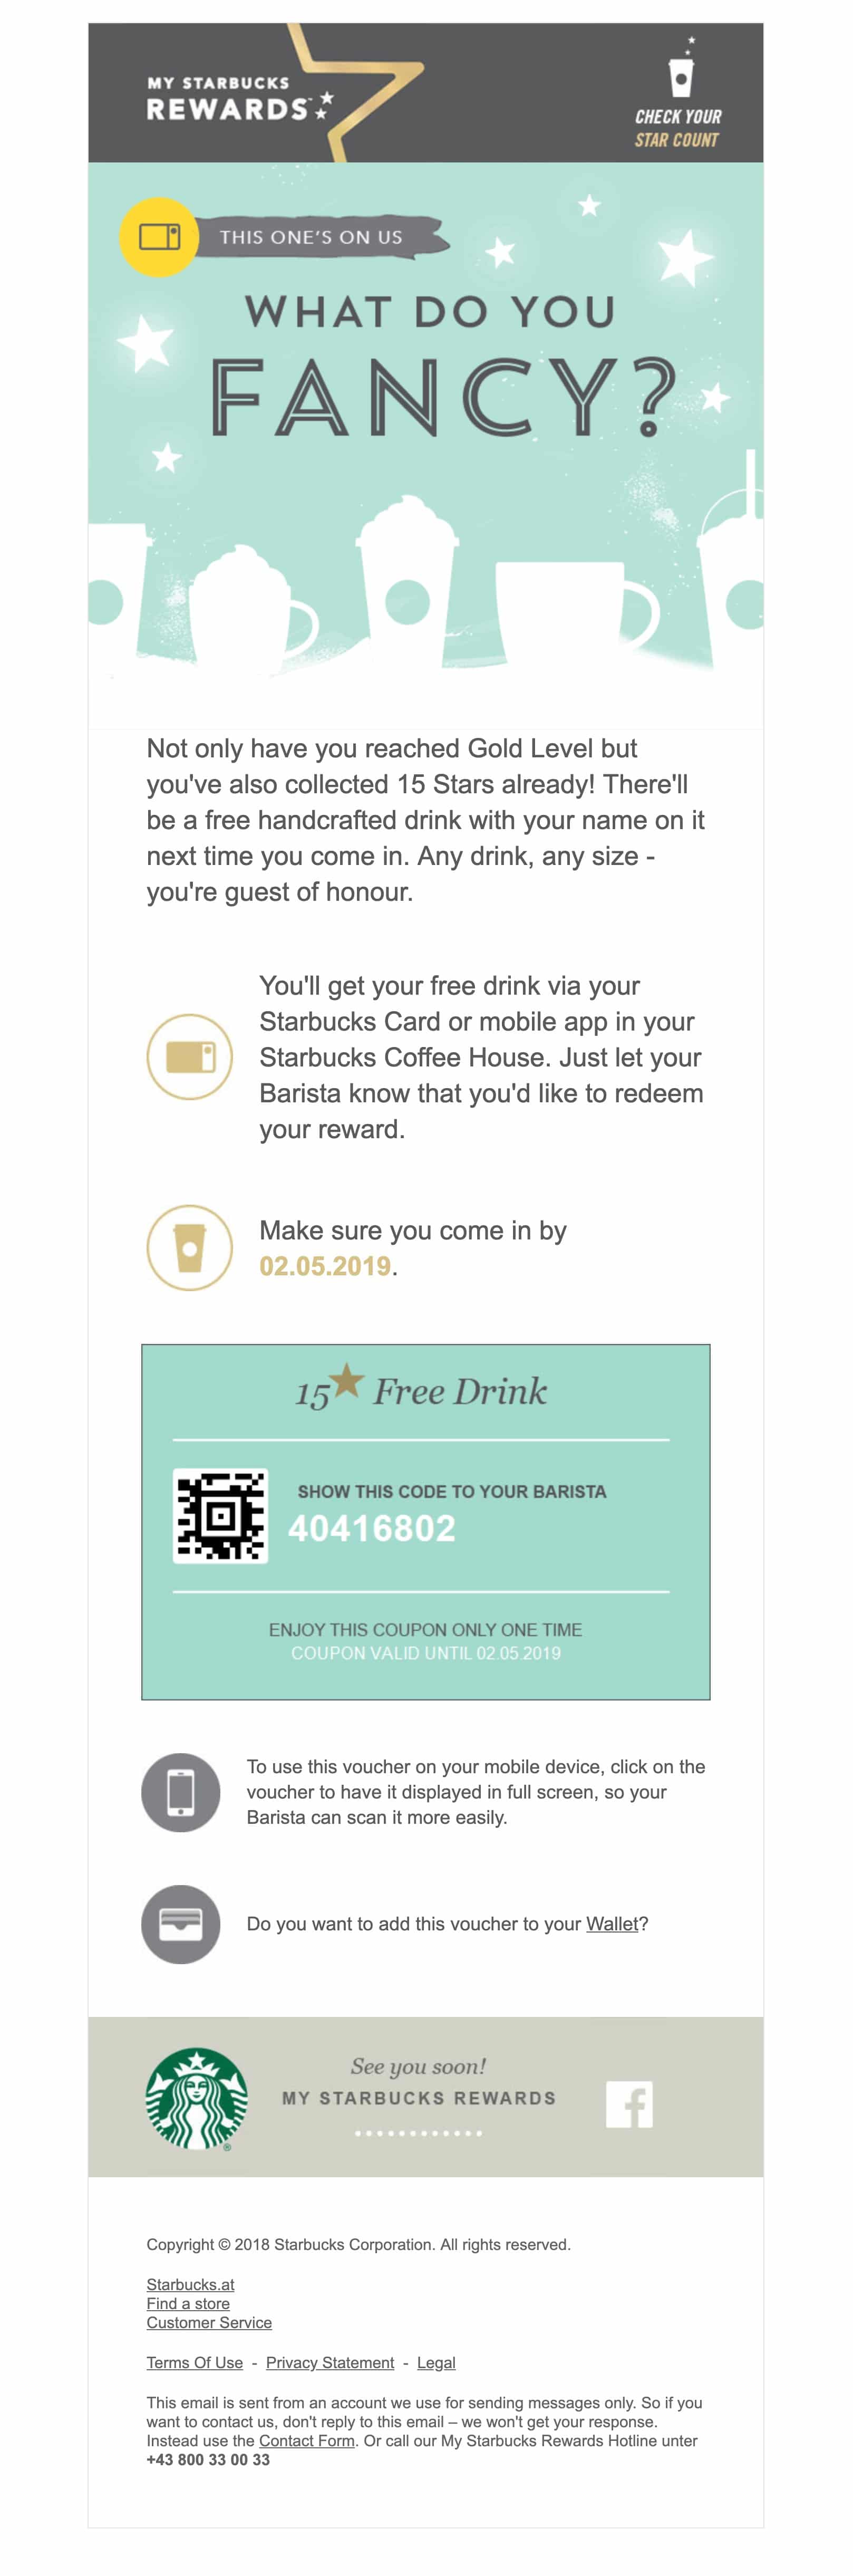  My Starbucks Rewards’ coupon email campaign with a coupon expiration date